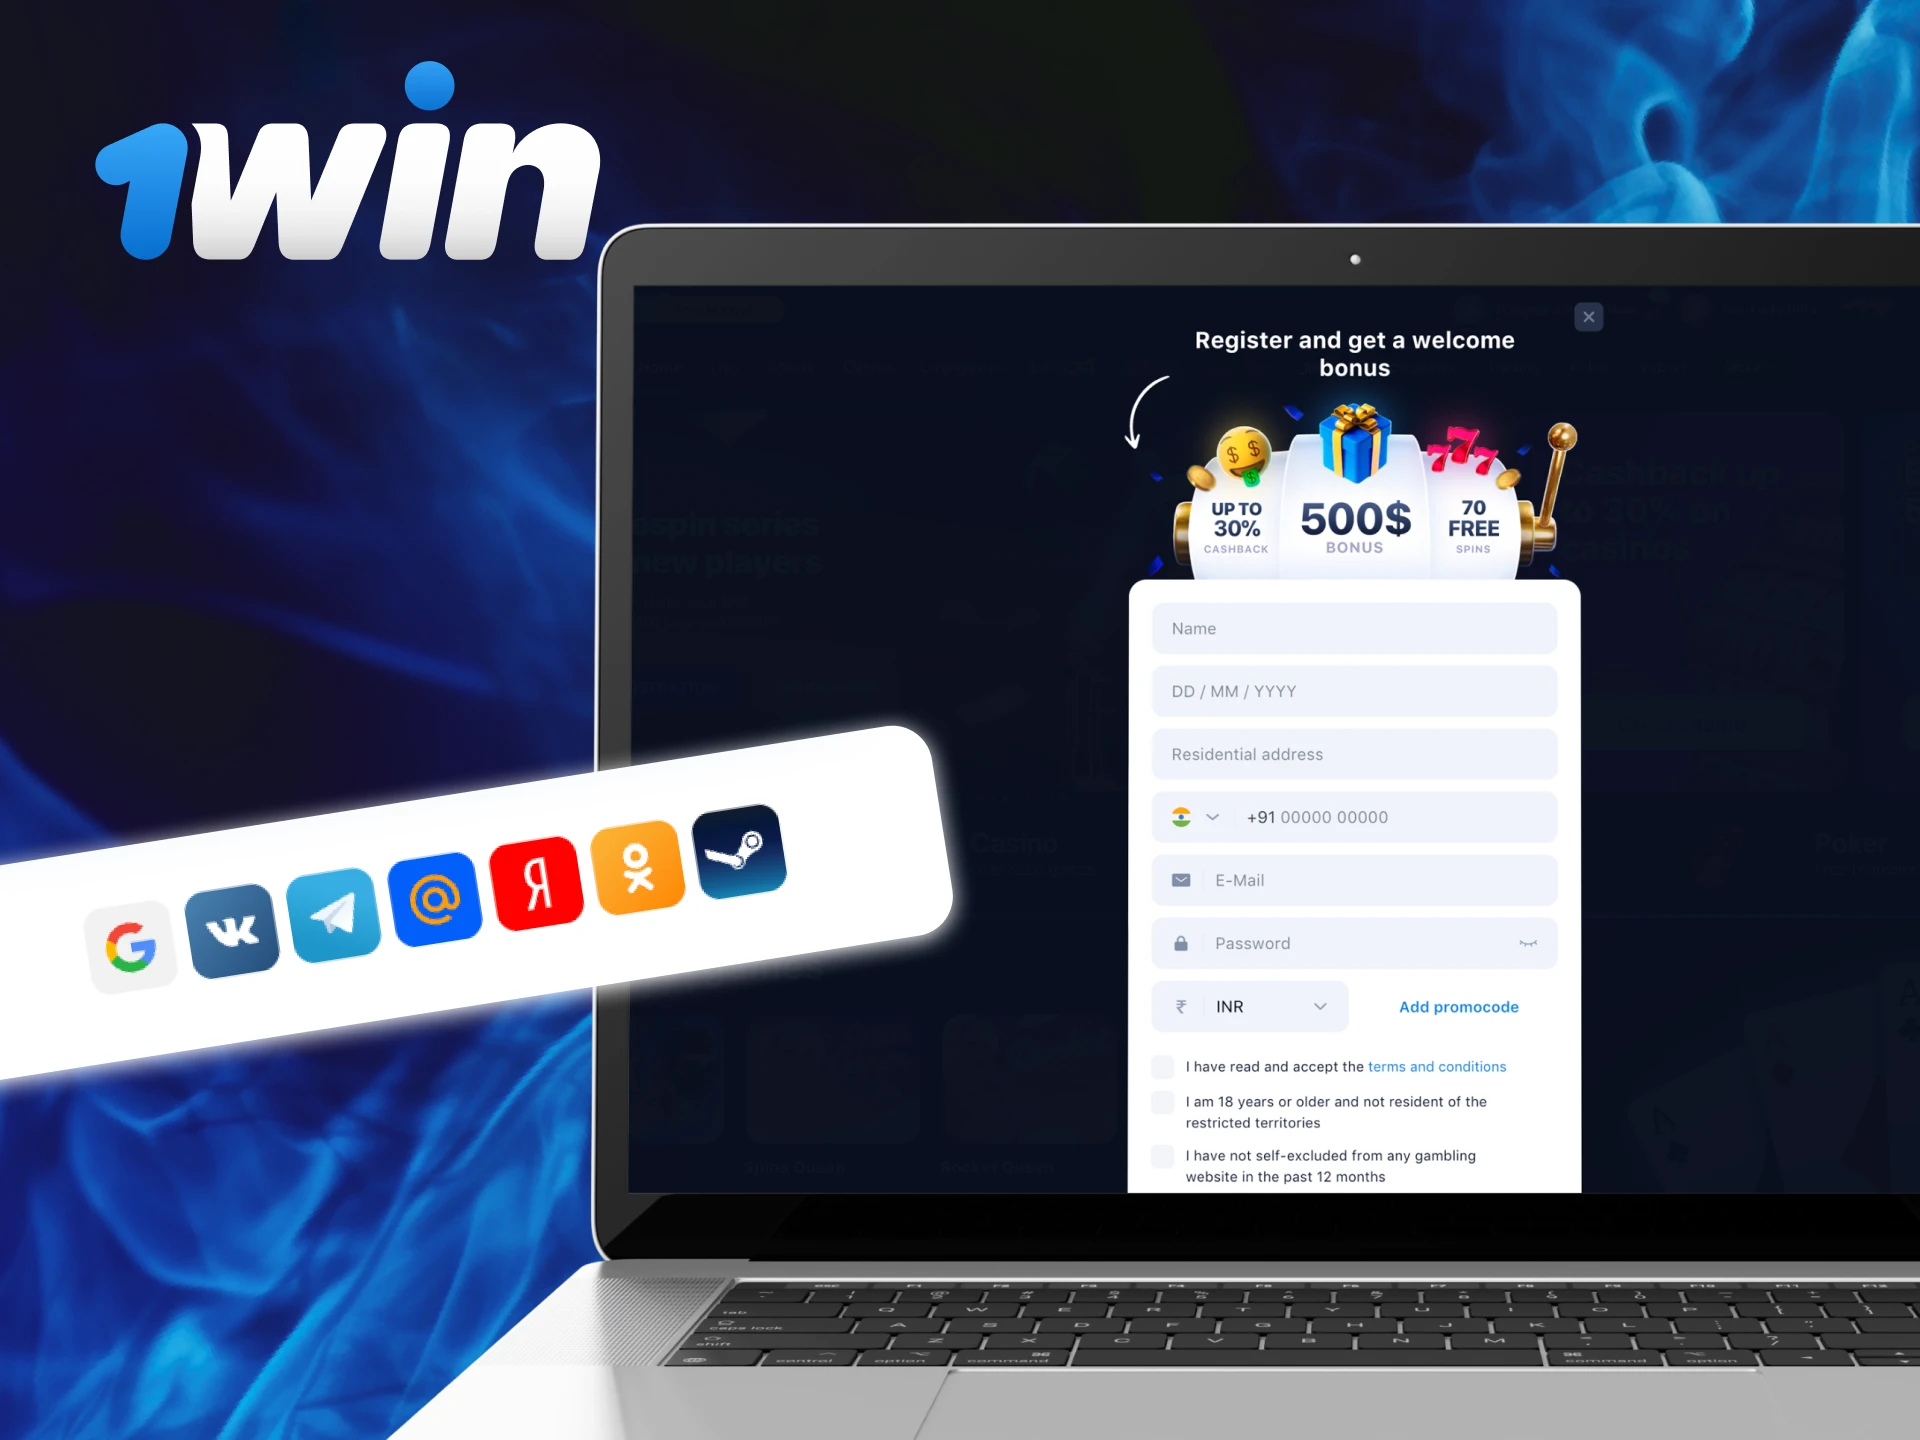 Is there registration using social networks on the 1Win casino website for the Aviator game.